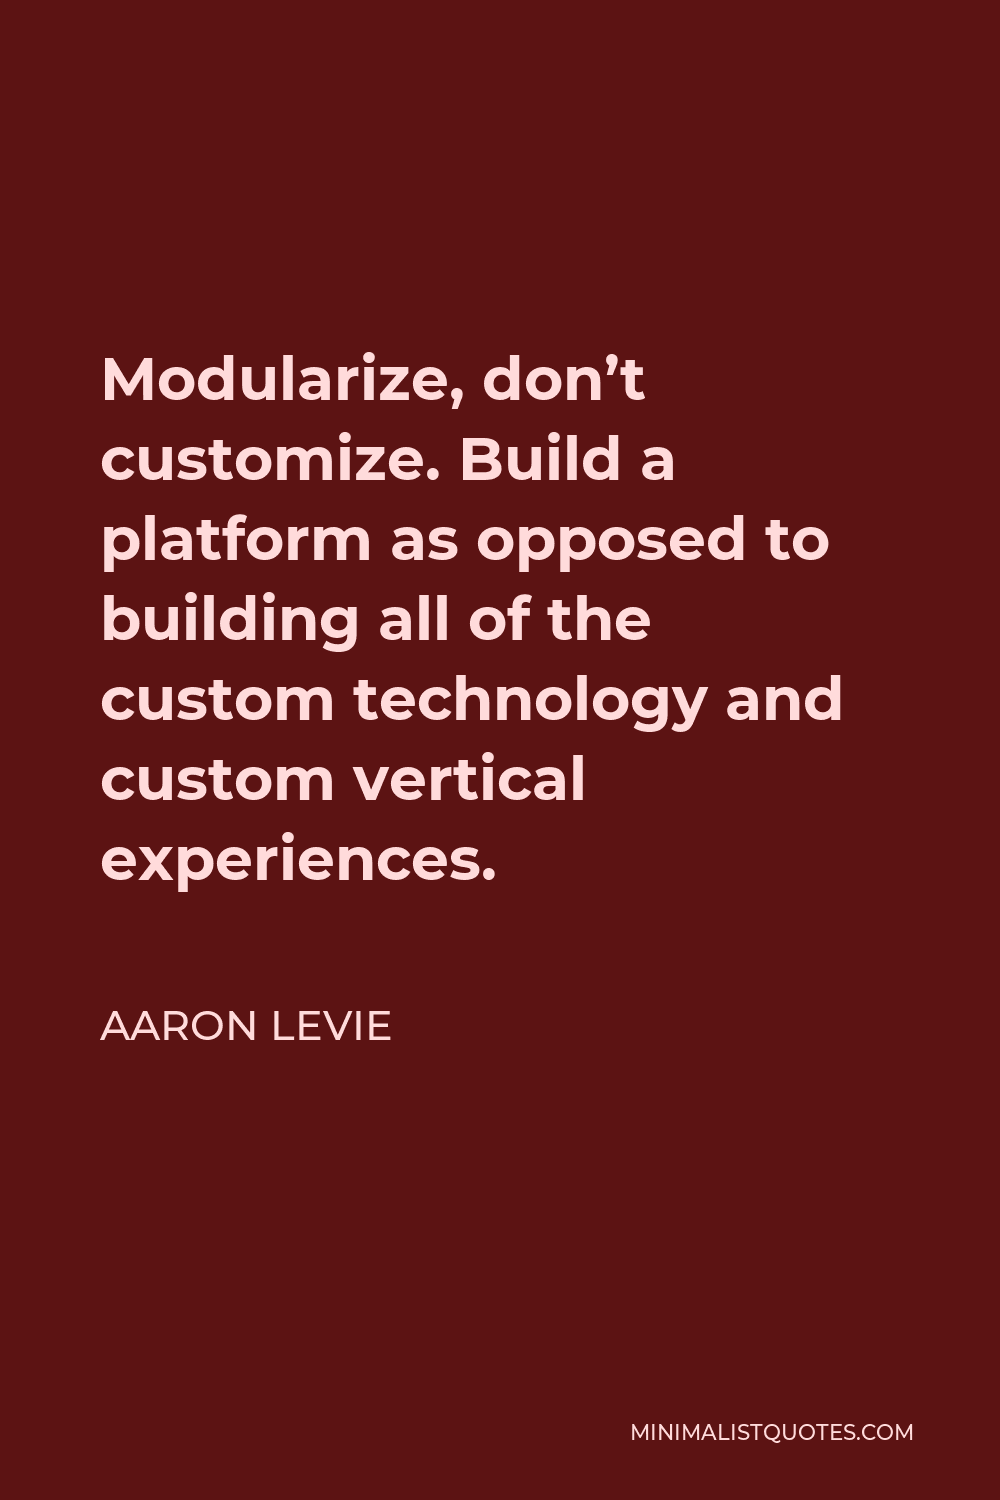 Aaron Levie Quote - Modularize, don’t customize. Build a platform as opposed to building all of the custom technology and custom vertical experiences.